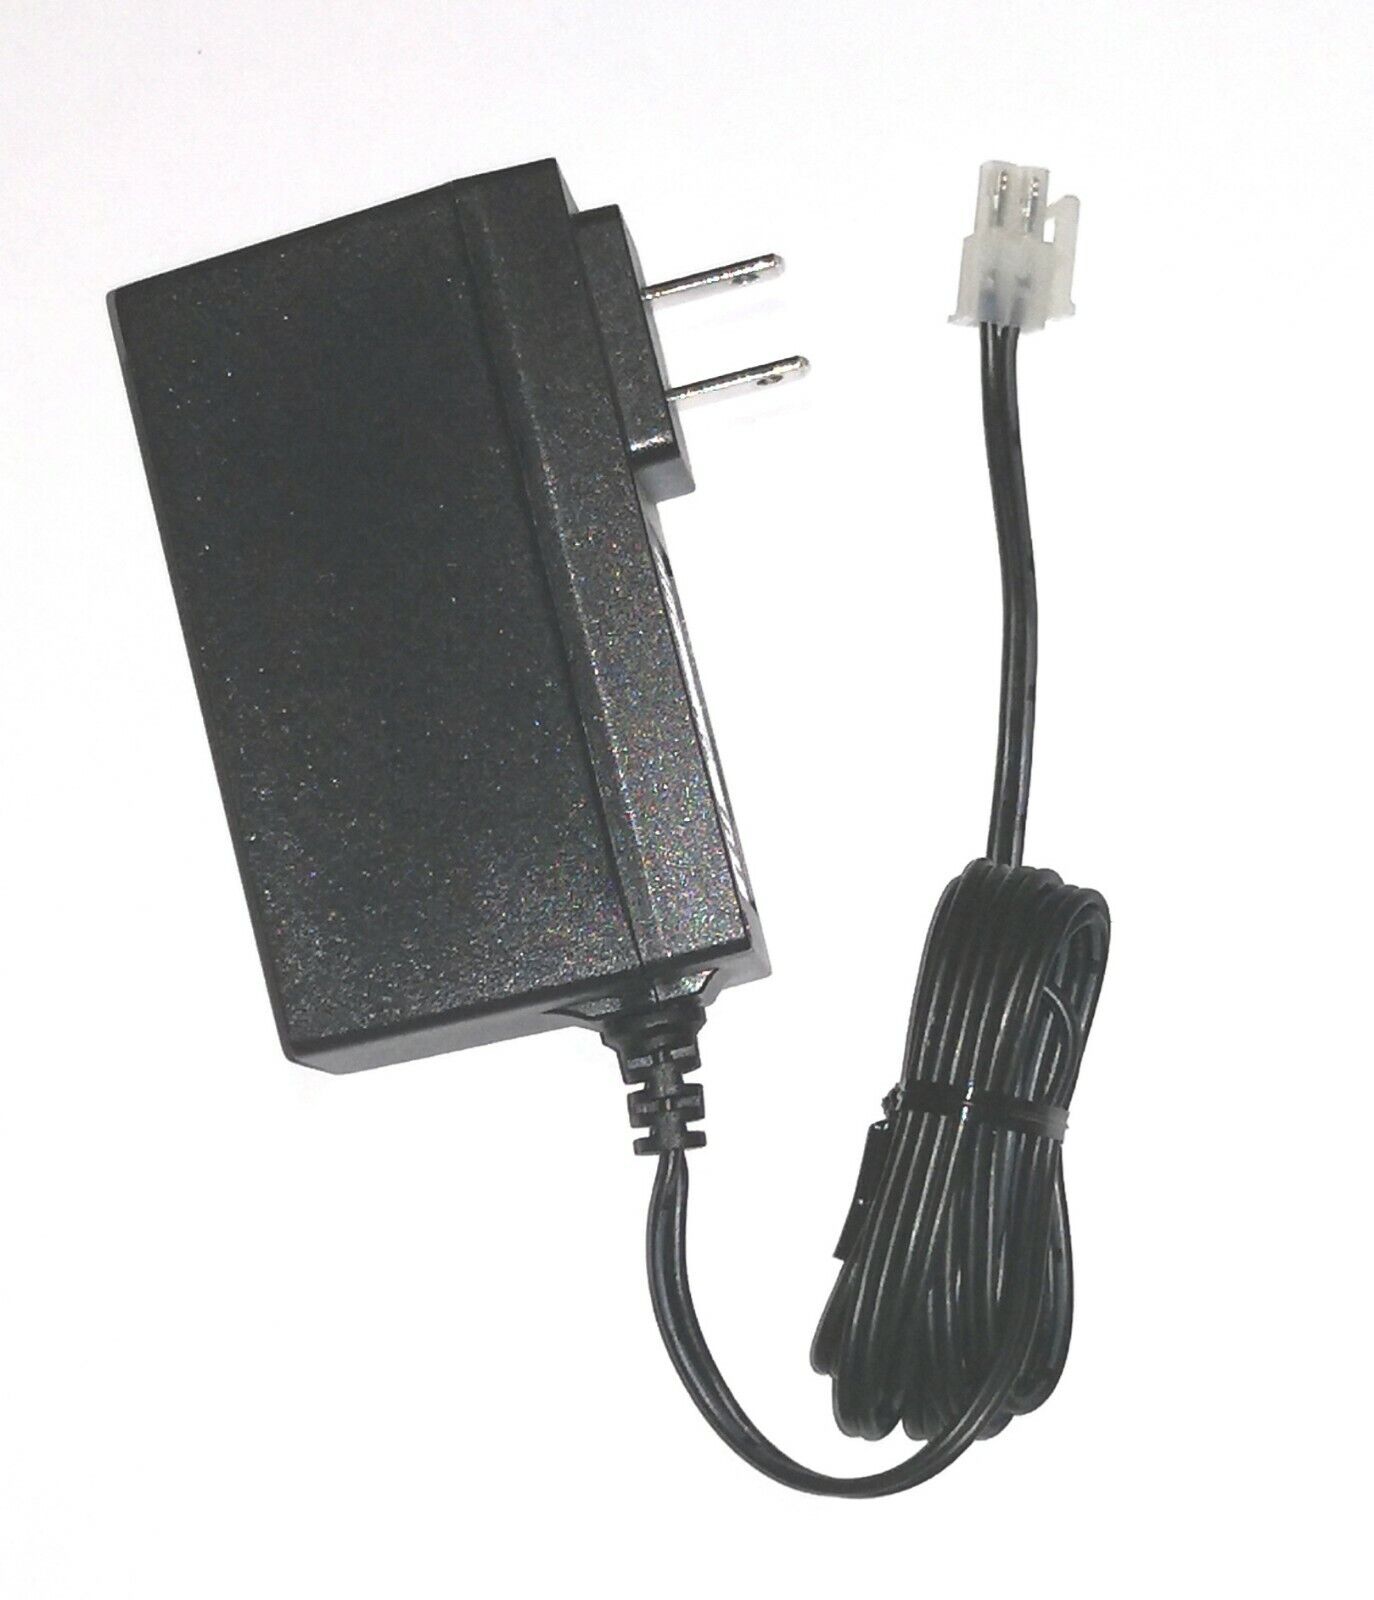 FORTINET AC Adapter Power Supply 60D FWF-60D FG-60C FWF-60C FG-40C FG-50E FG-70D Model FORTINET 60D FWF-60D FG-60C FWF-